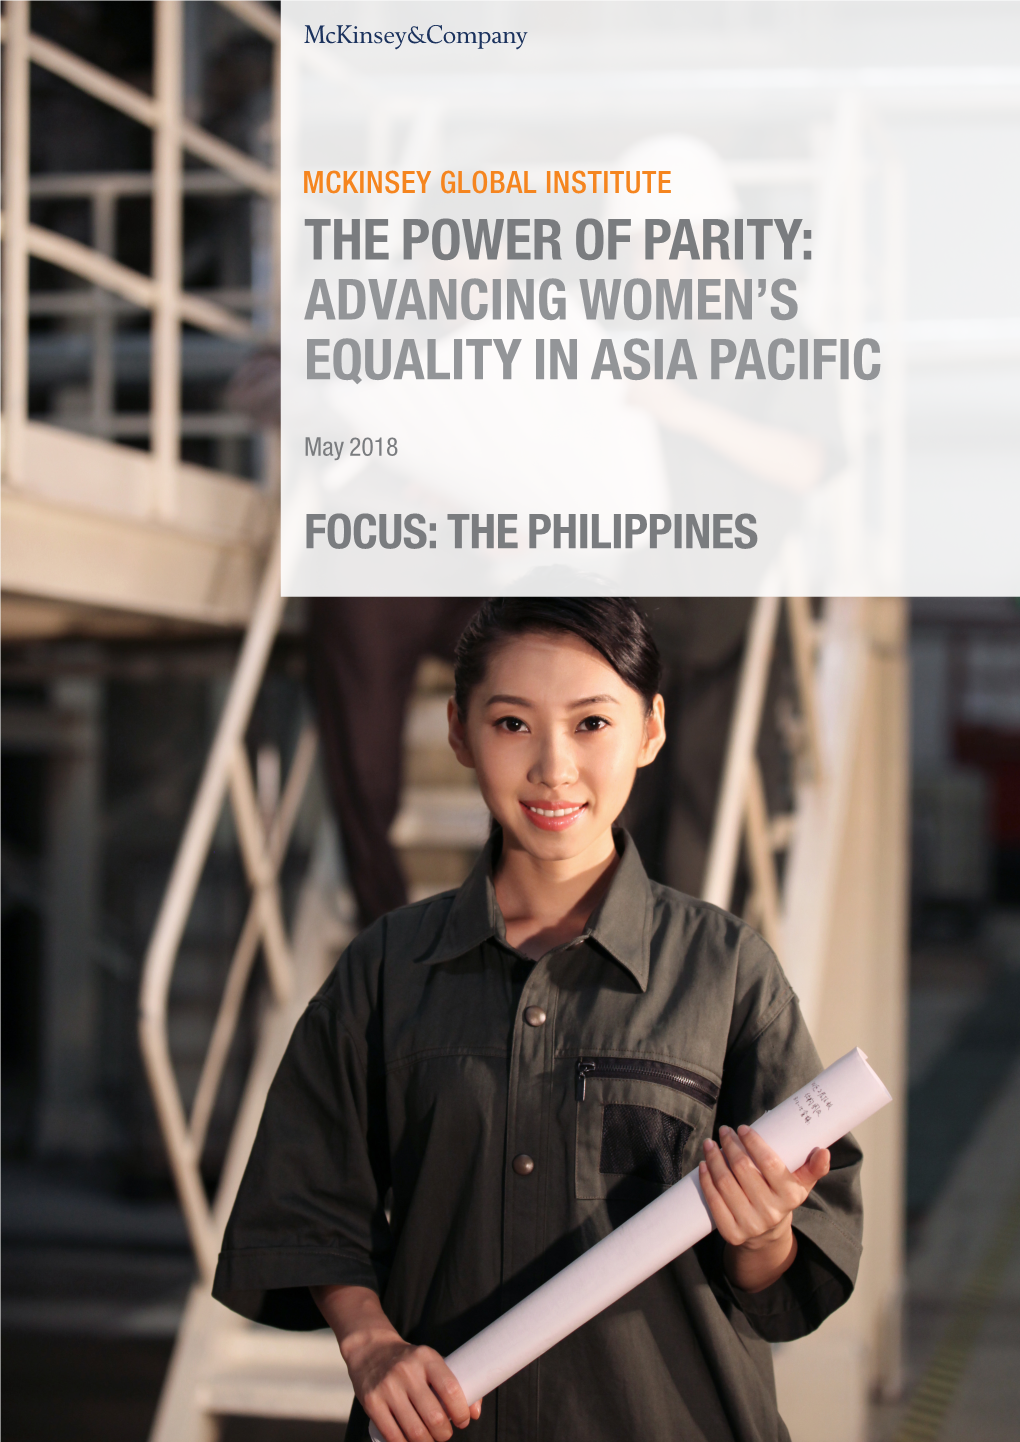 The Power of Parity: Advancing Women's Equality